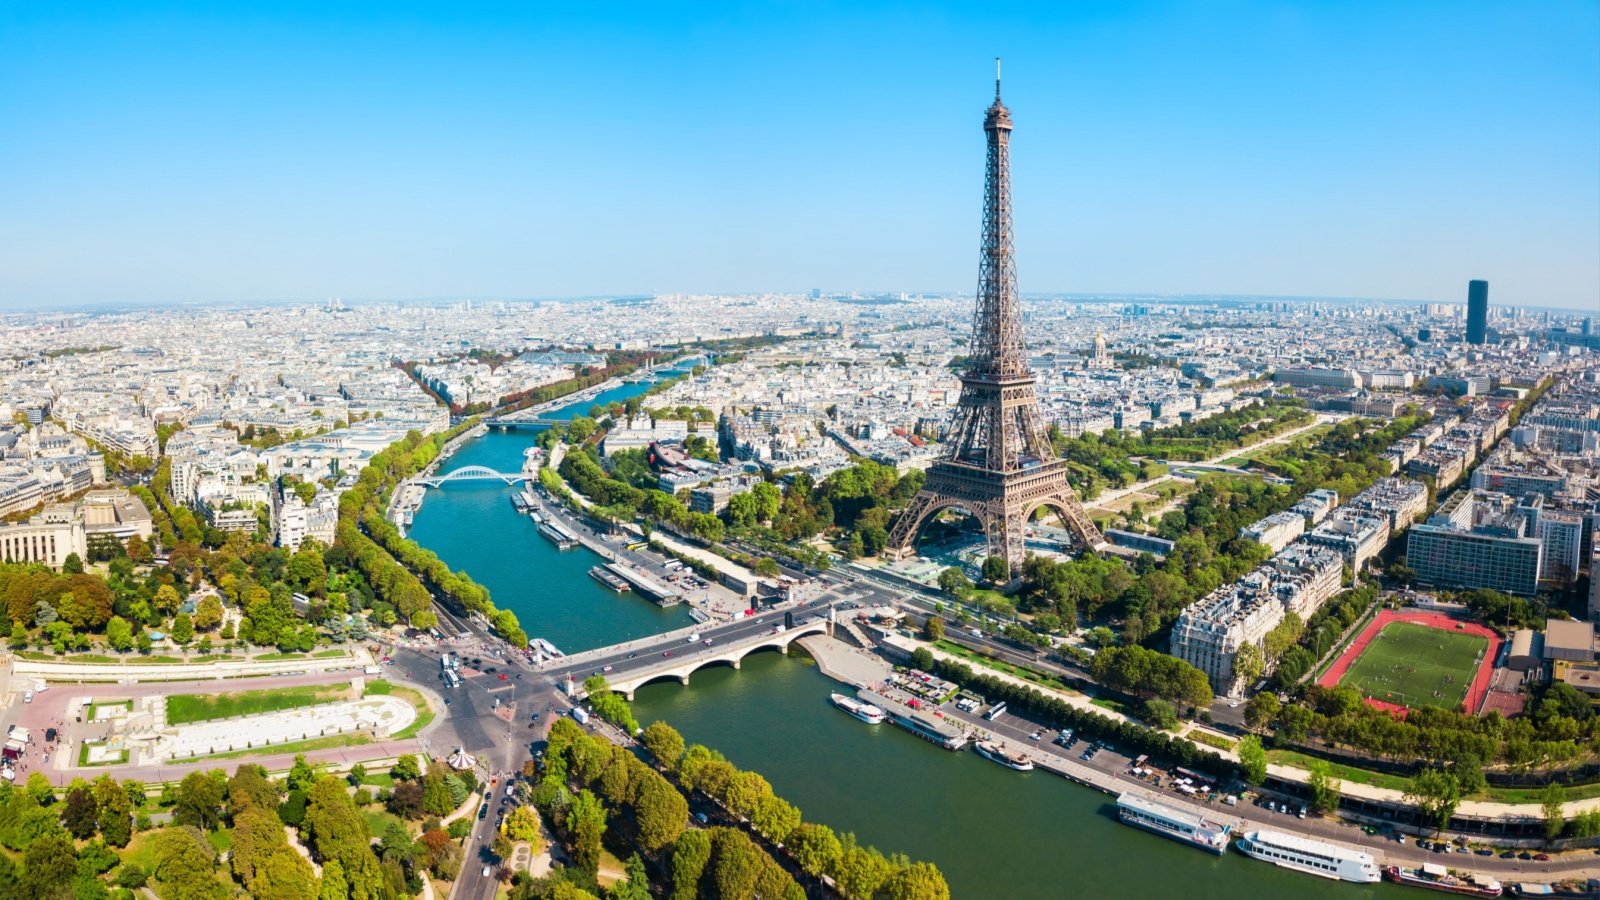 <p>Paris is considered a very romantic city, which makes it a popular destination. But accommodation is costly, and many of the popular tourist destinations have overpriced shopping and dining options. Major attractions can also get very crowded during peak season.</p>